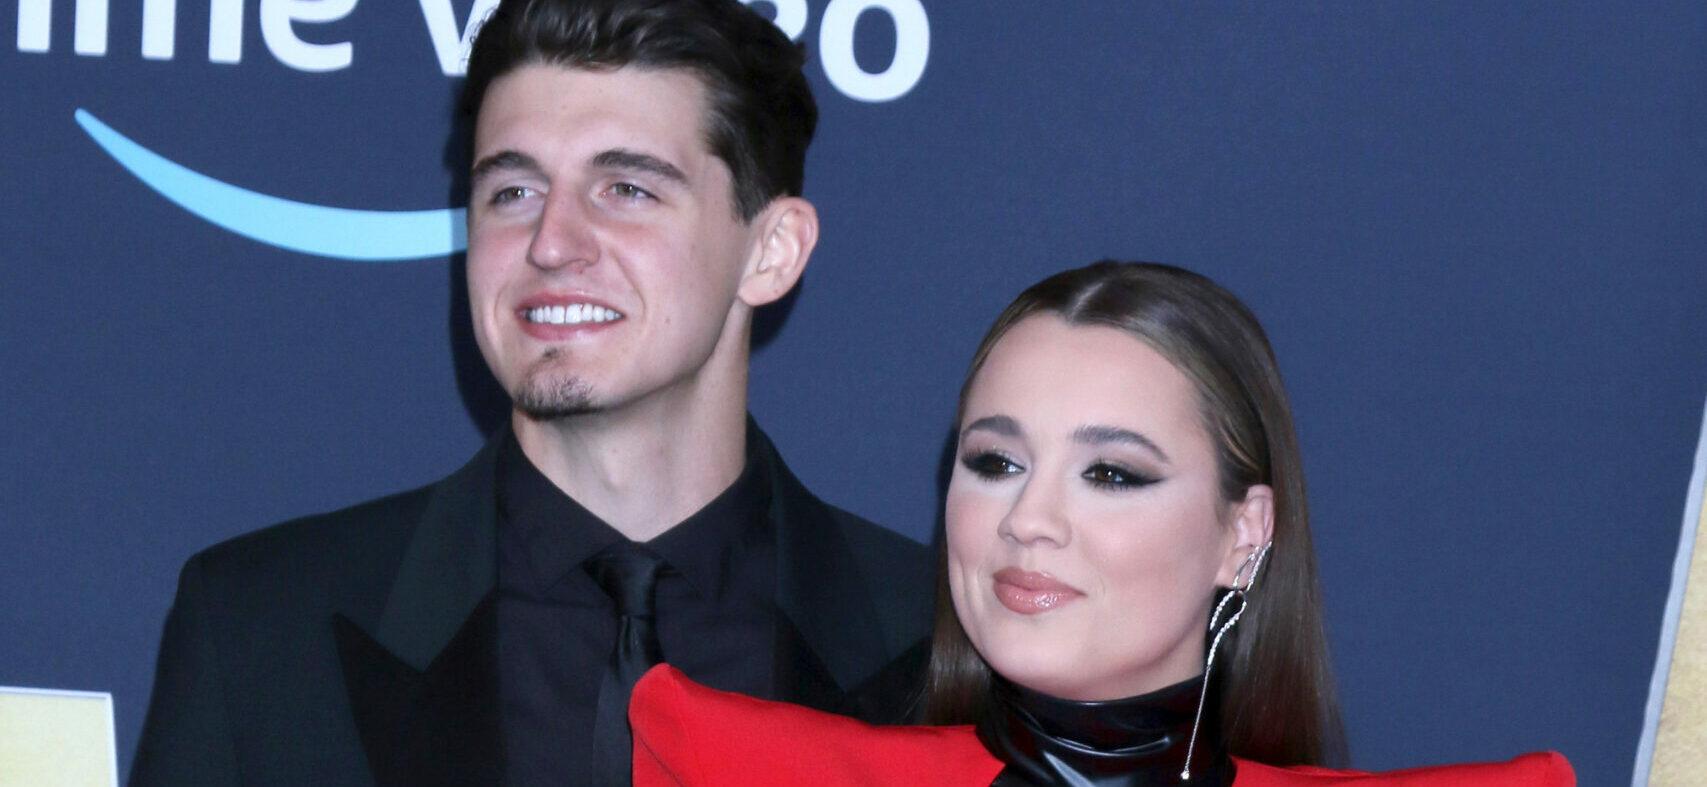 Gabby Barrett Is Expecting Baby Number 2 With Hubby Cade Foehner